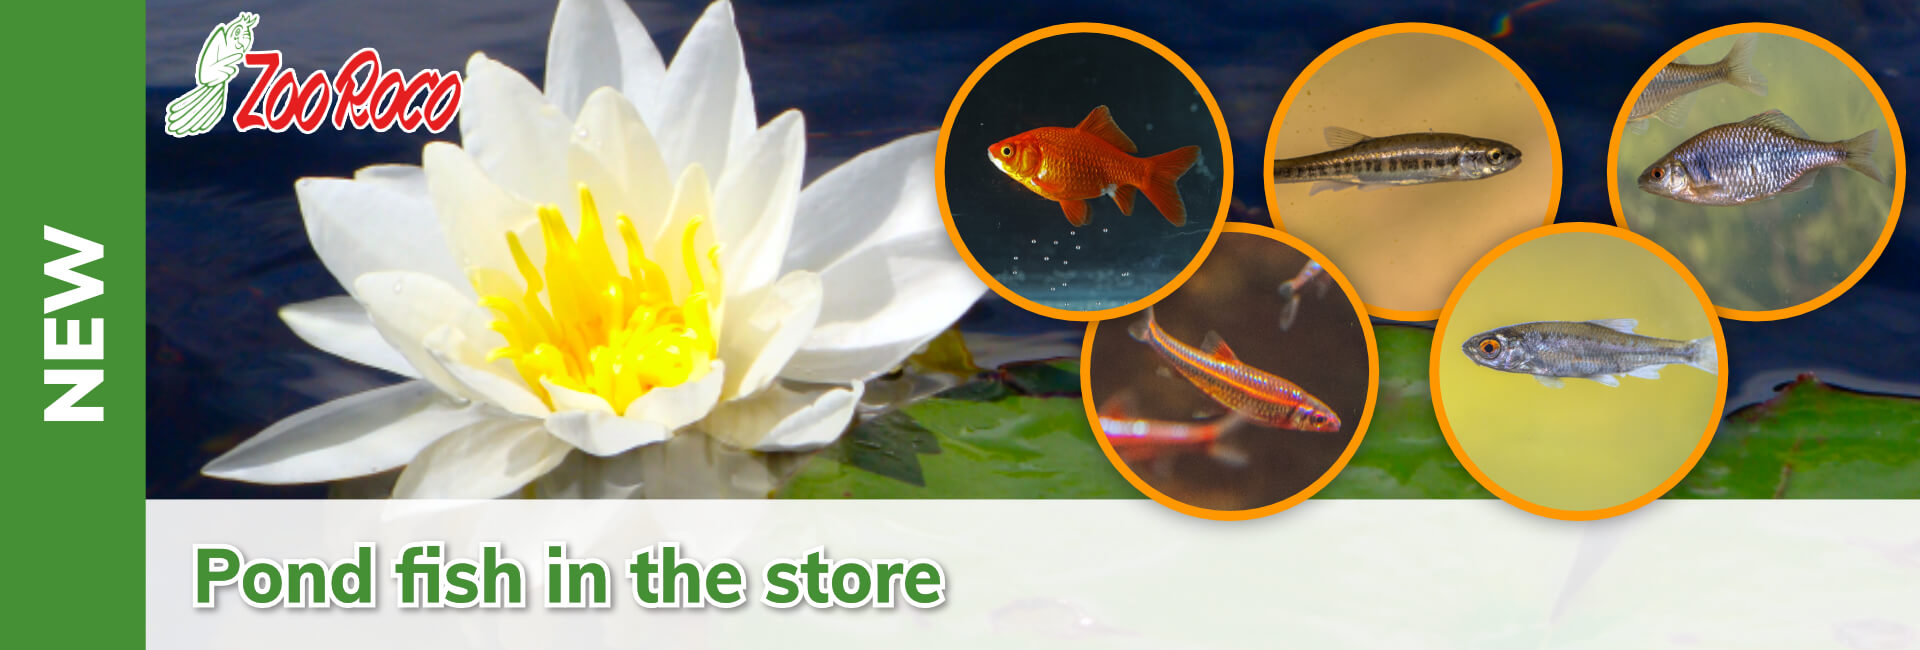 Pond fish in the store